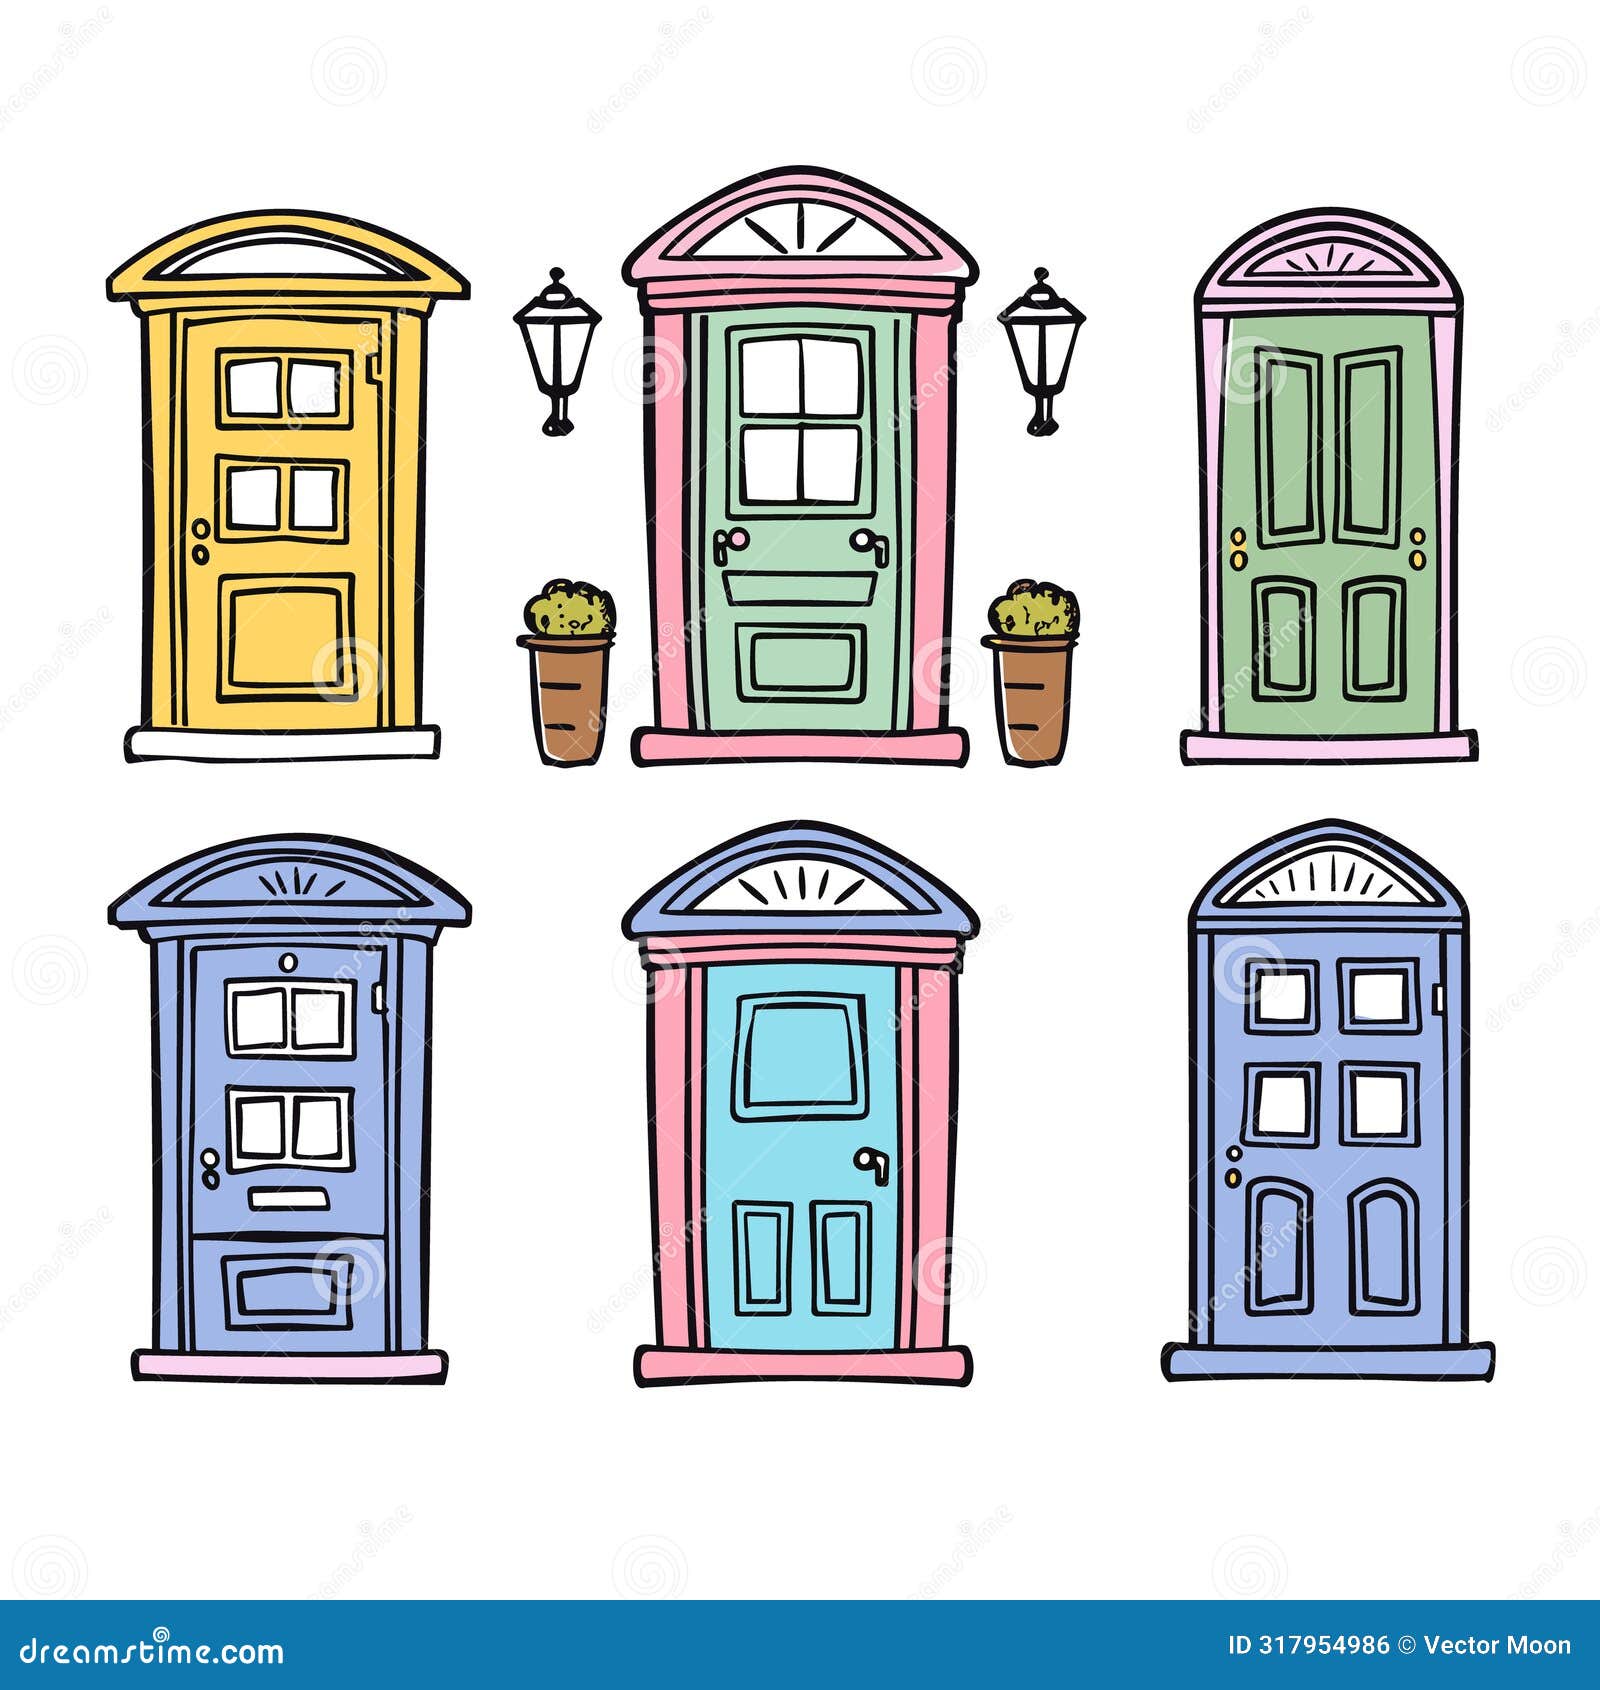 colorful doors lined up street style, six diverse house entrances, cute urban concept. handdrawn